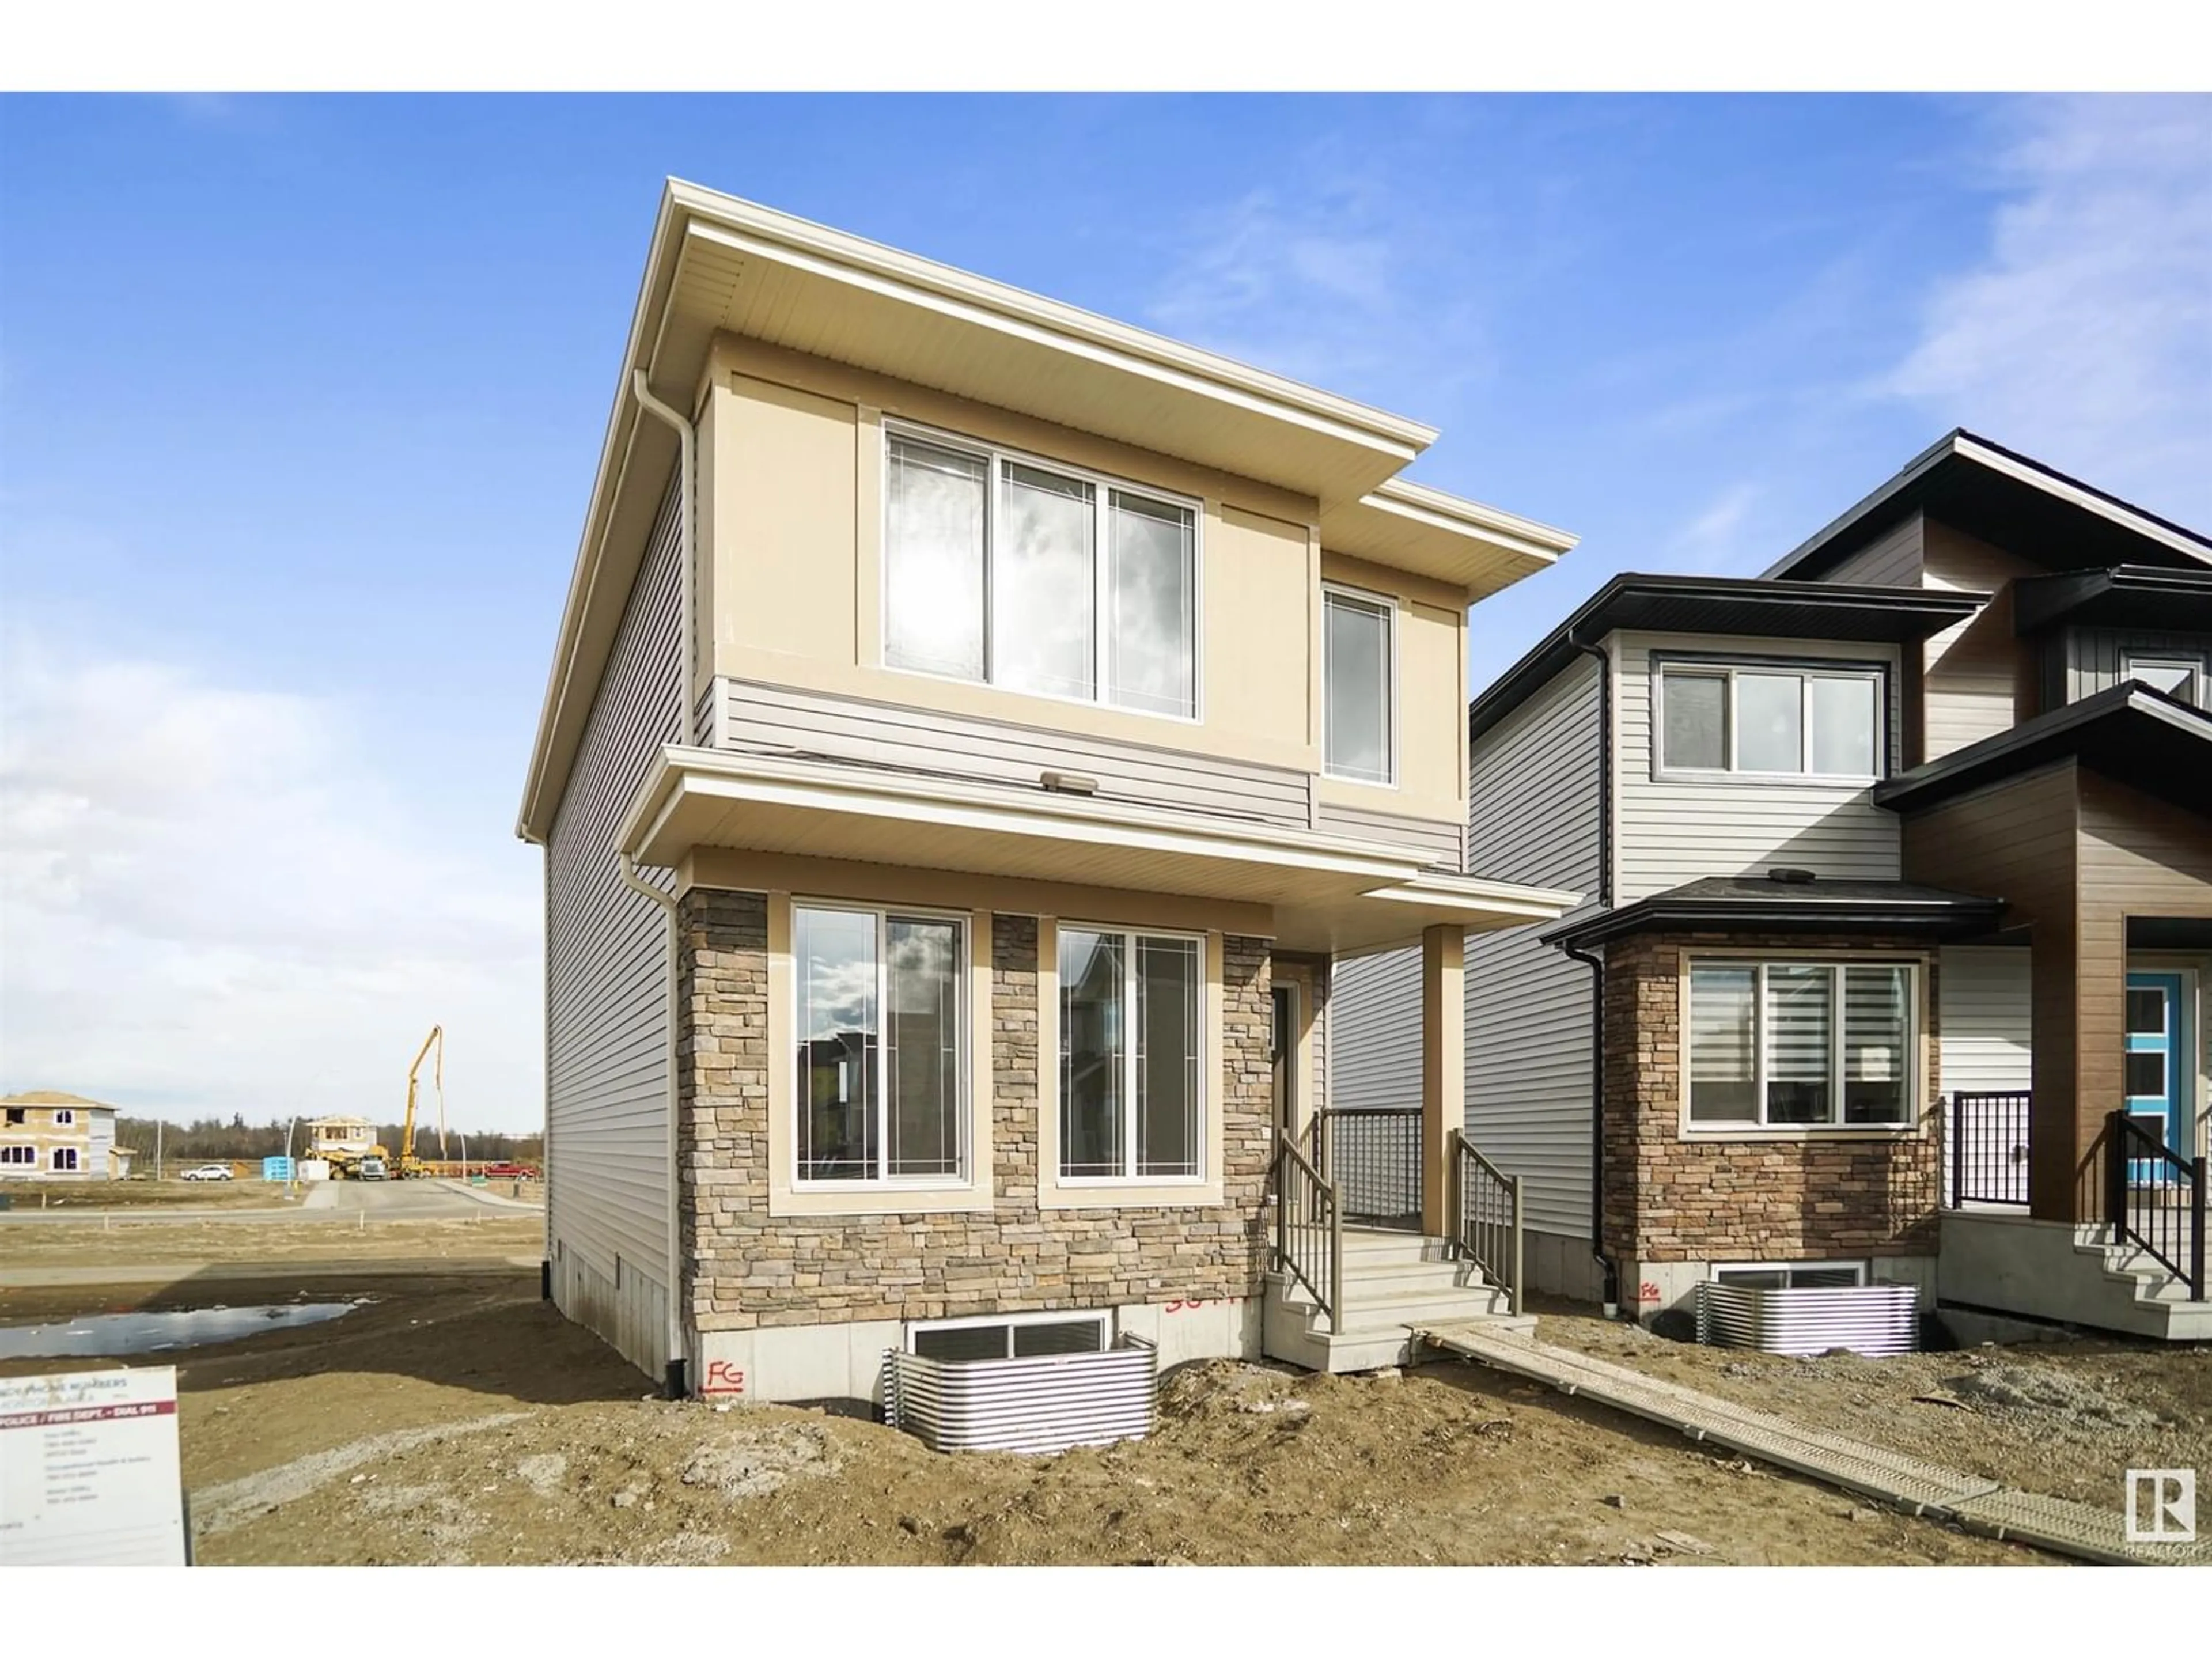 A pic from exterior of the house or condo for 17307 6 ST NE, Edmonton Alberta T5Y4G1